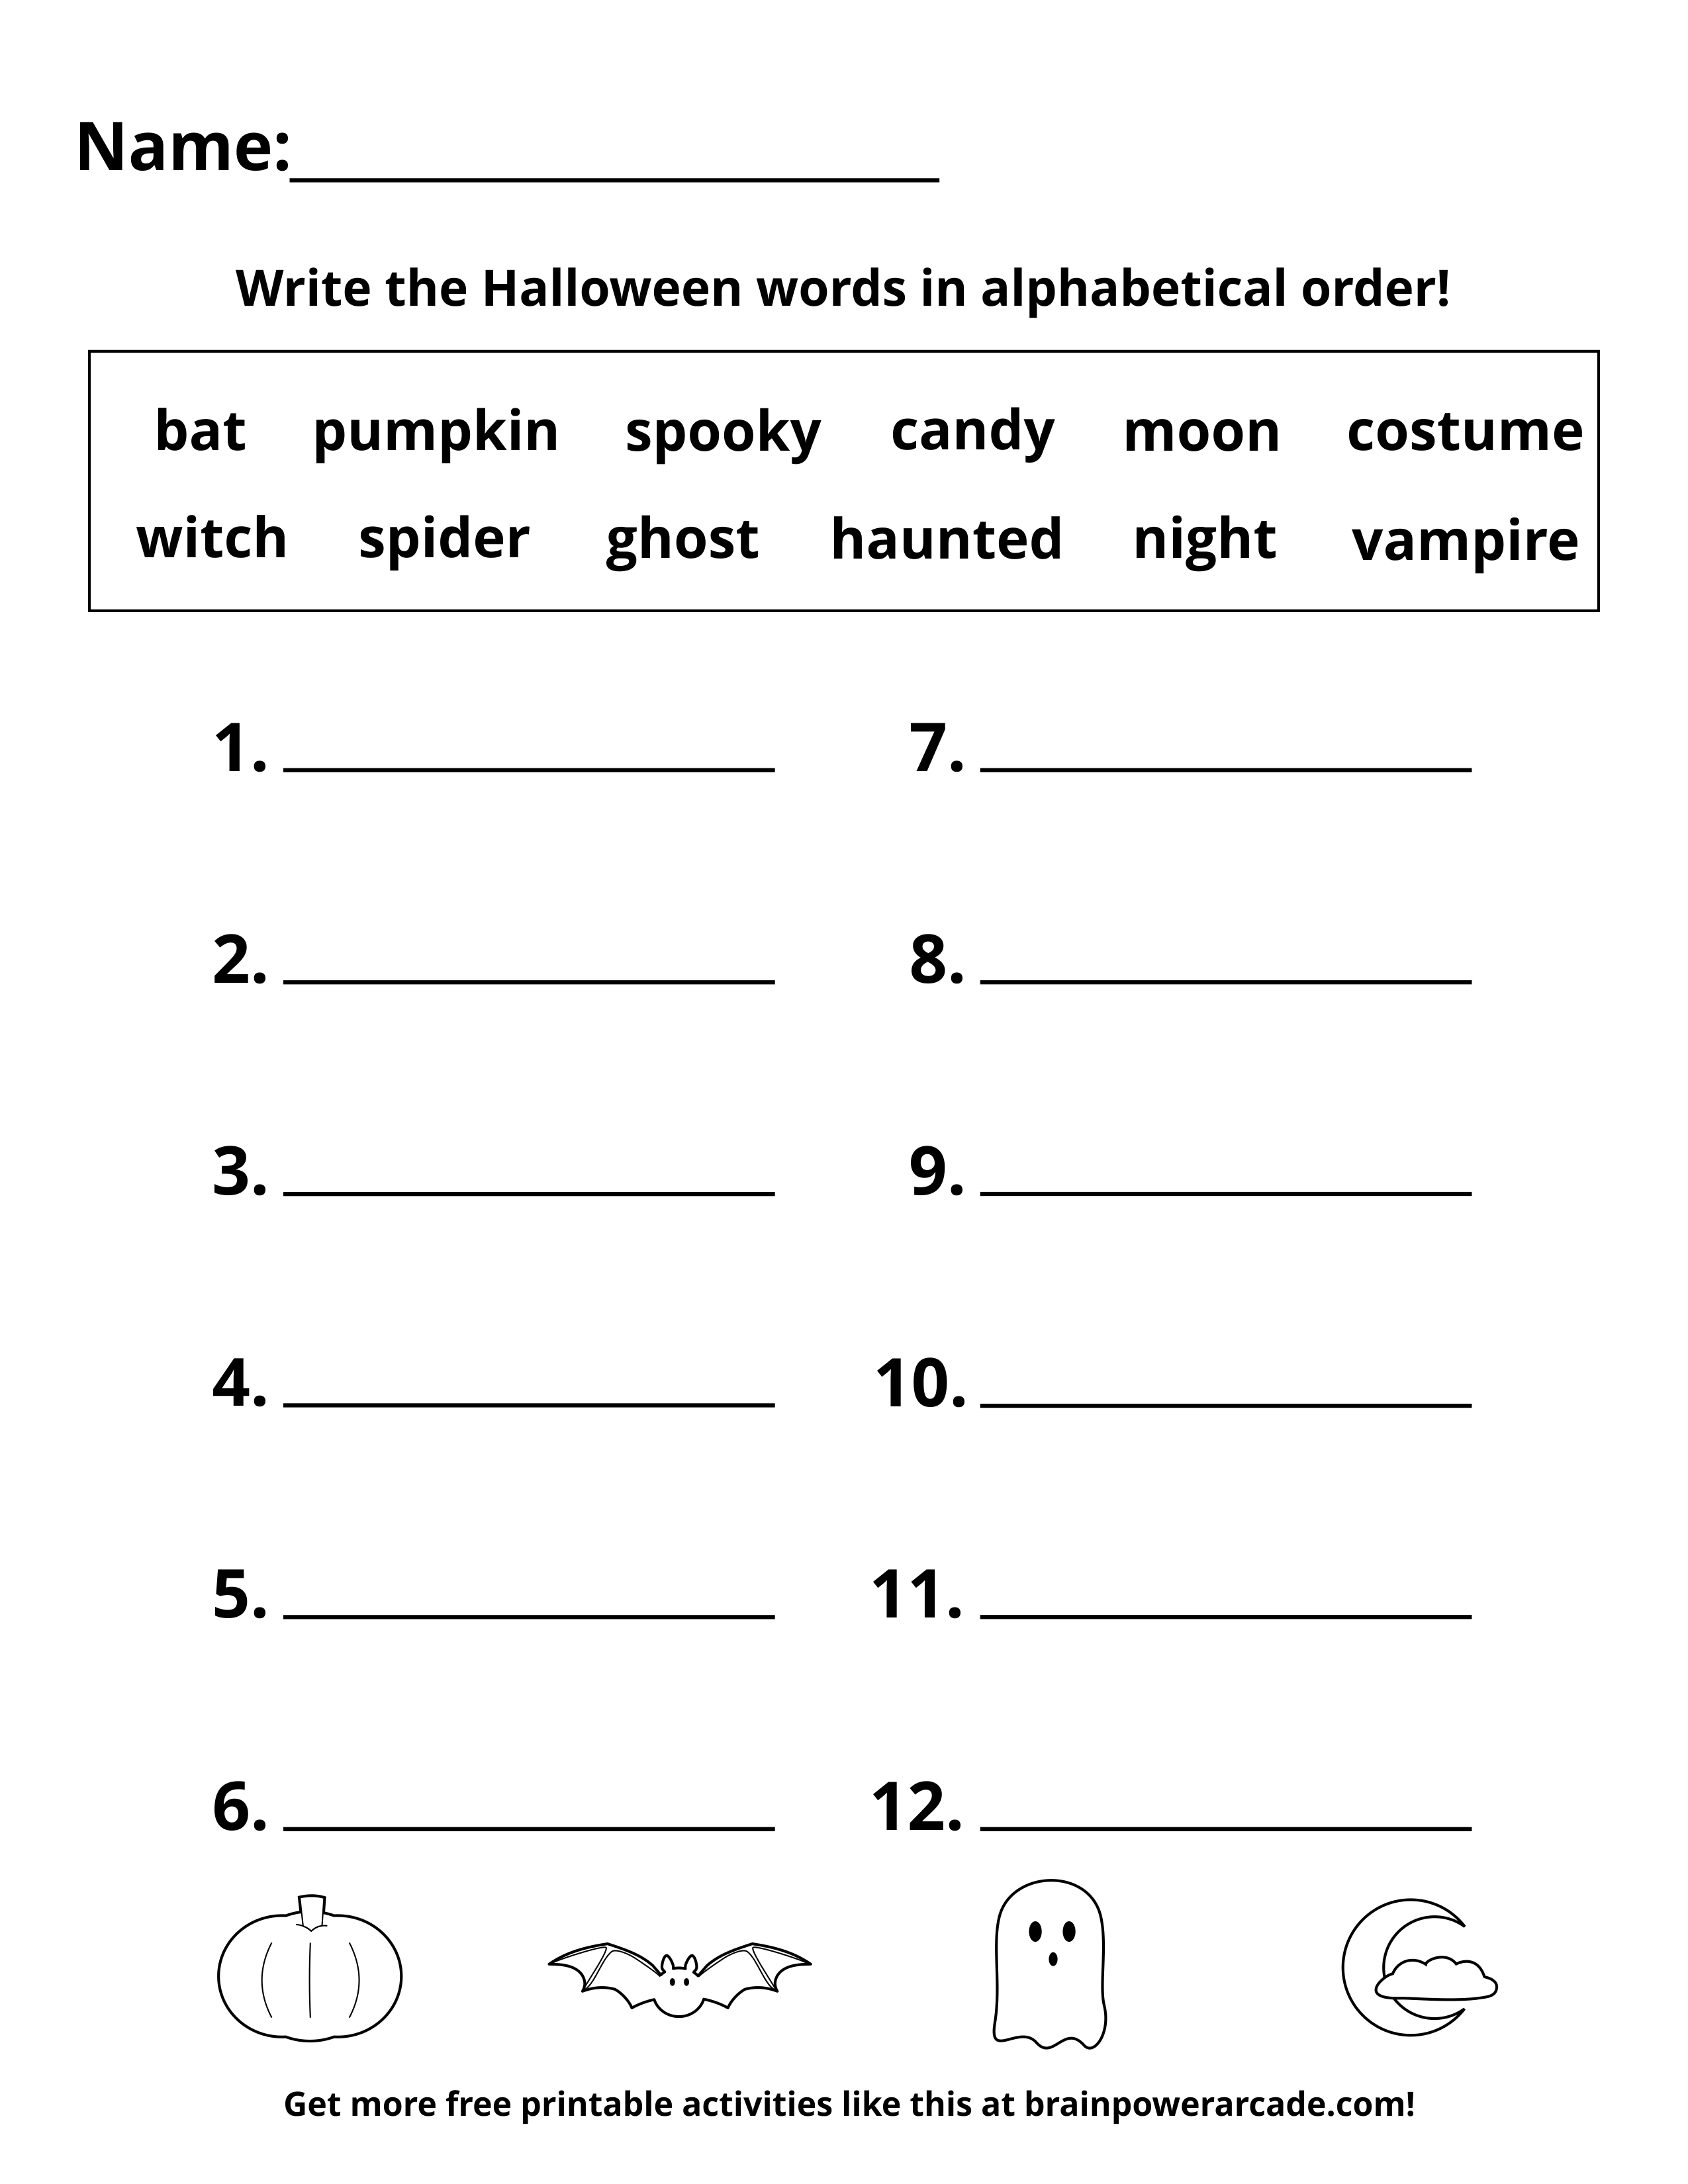 Write the Halloween Words in Alphabetical Order